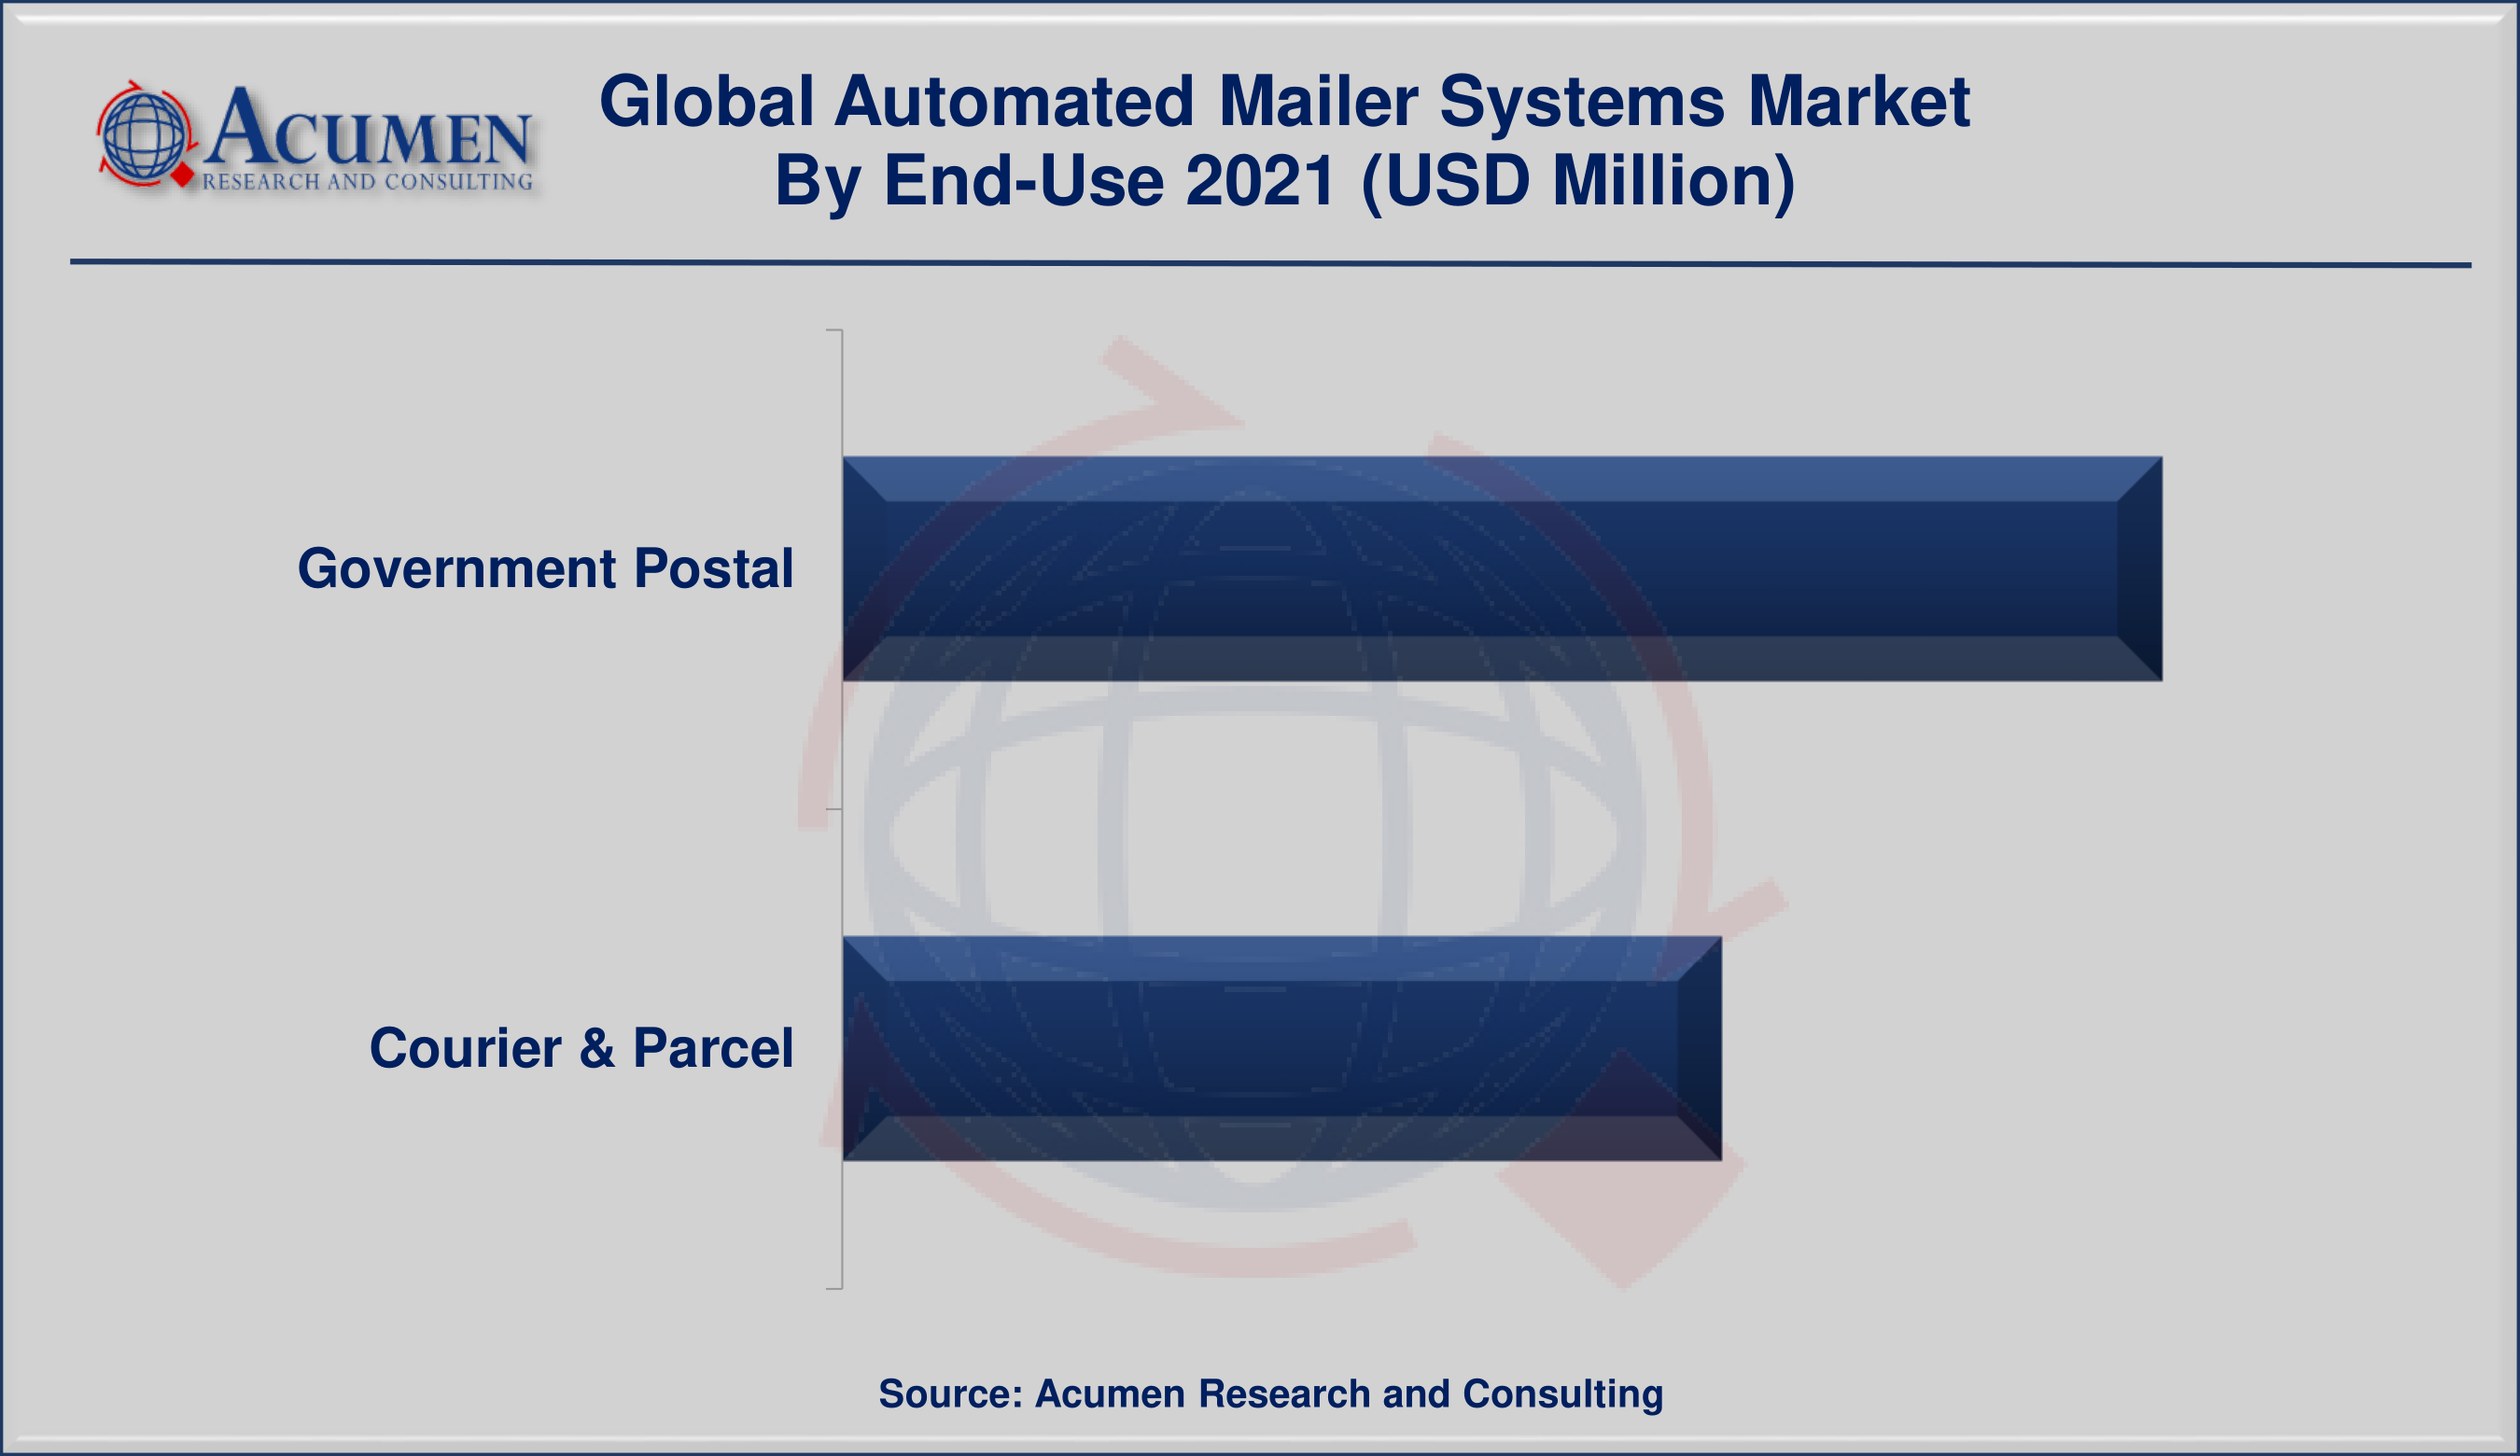 Automated Mailer Systems Market By End-Use is predicted to be worth USD 1,459 Million by 2030, with a CAGR of 6.2%